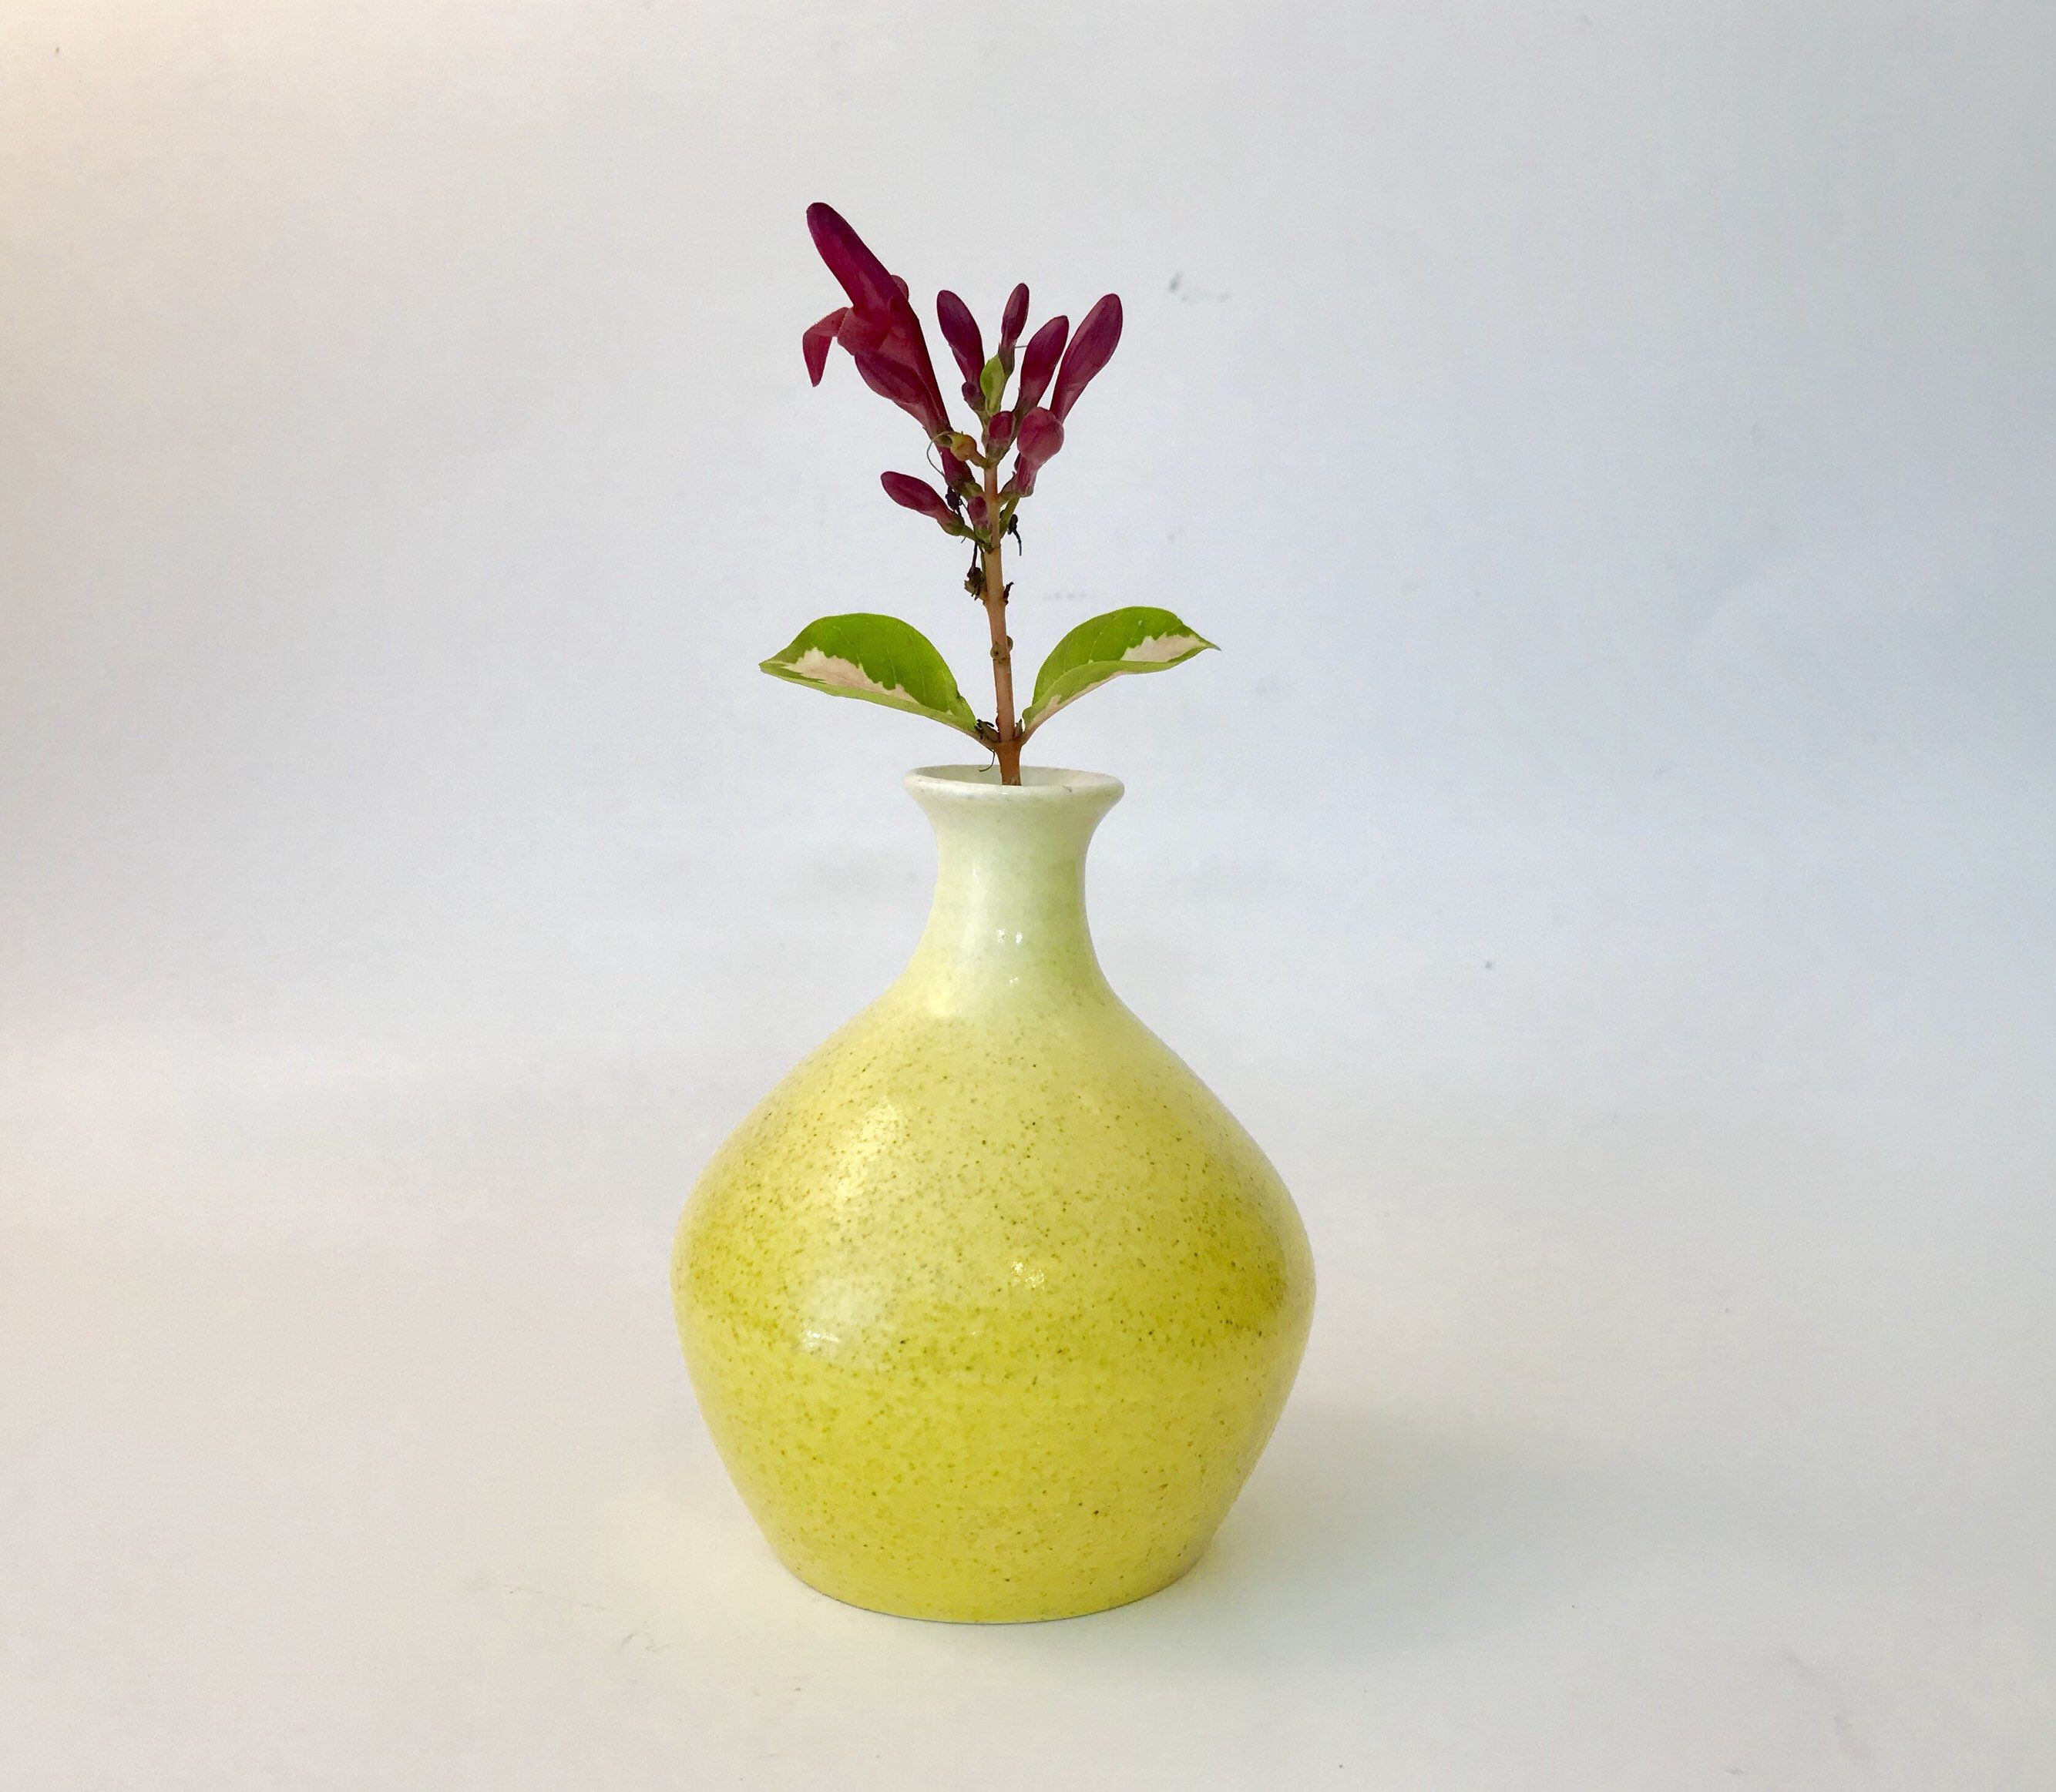 16 attractive Small Yellow Bud Vases 2024 free download small yellow bud vases of ceramic bud vase yellow white speckled pottery vase dots glazed regarding small handmade ceramic bud vase yellow white speckled pottery vase dots glazed flower